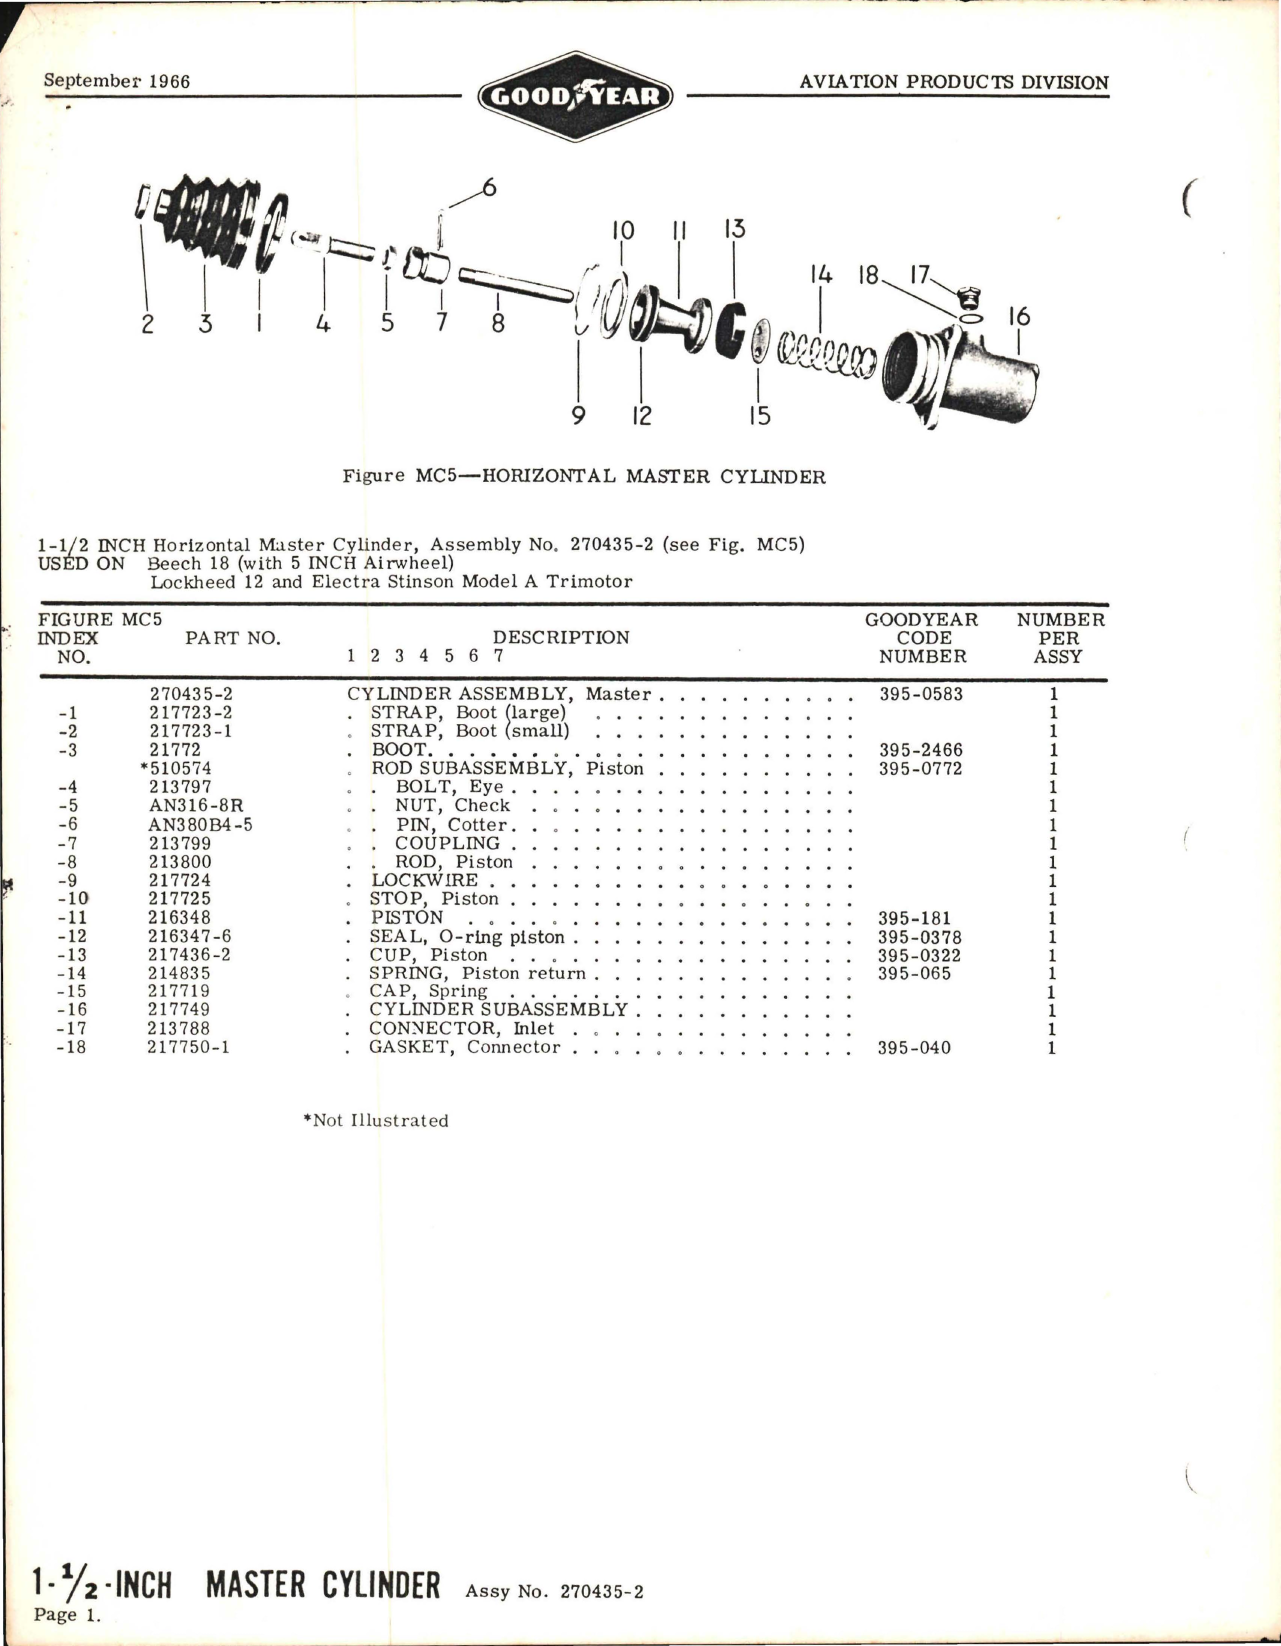 Sample page 1 from AirCorps Library document: Horizontal Master Cylinder